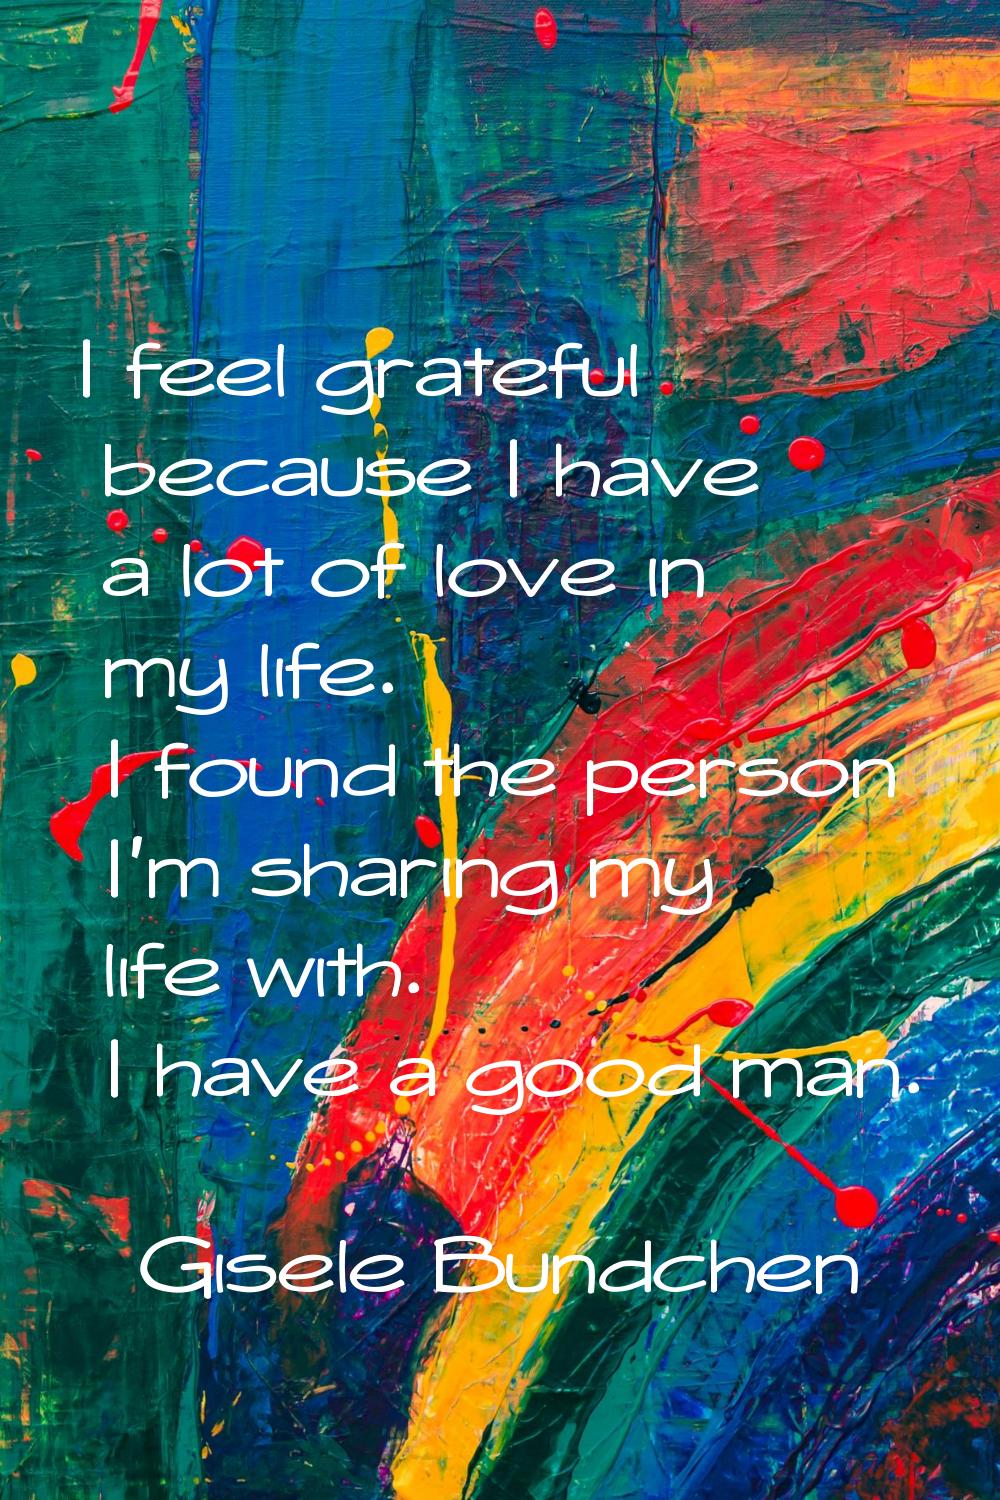 I feel grateful because I have a lot of love in my life. I found the person I'm sharing my life wit